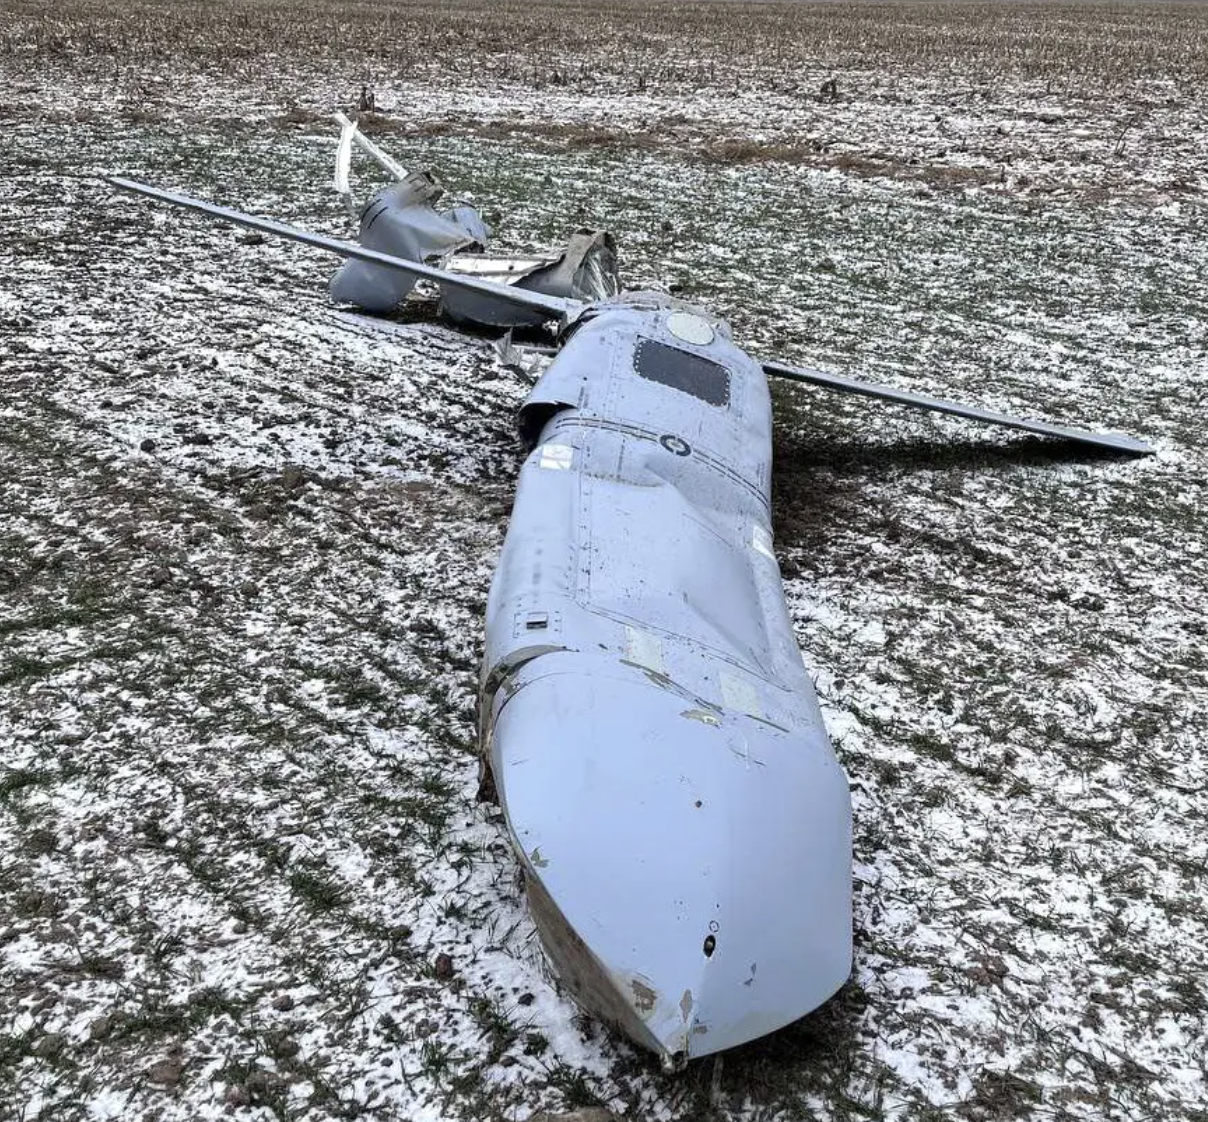 A largely intact Kh-101 air-launched cruise missile claimed to have been shot down by Ukrainian air defenses. <em>Ukrainian Air Force</em>